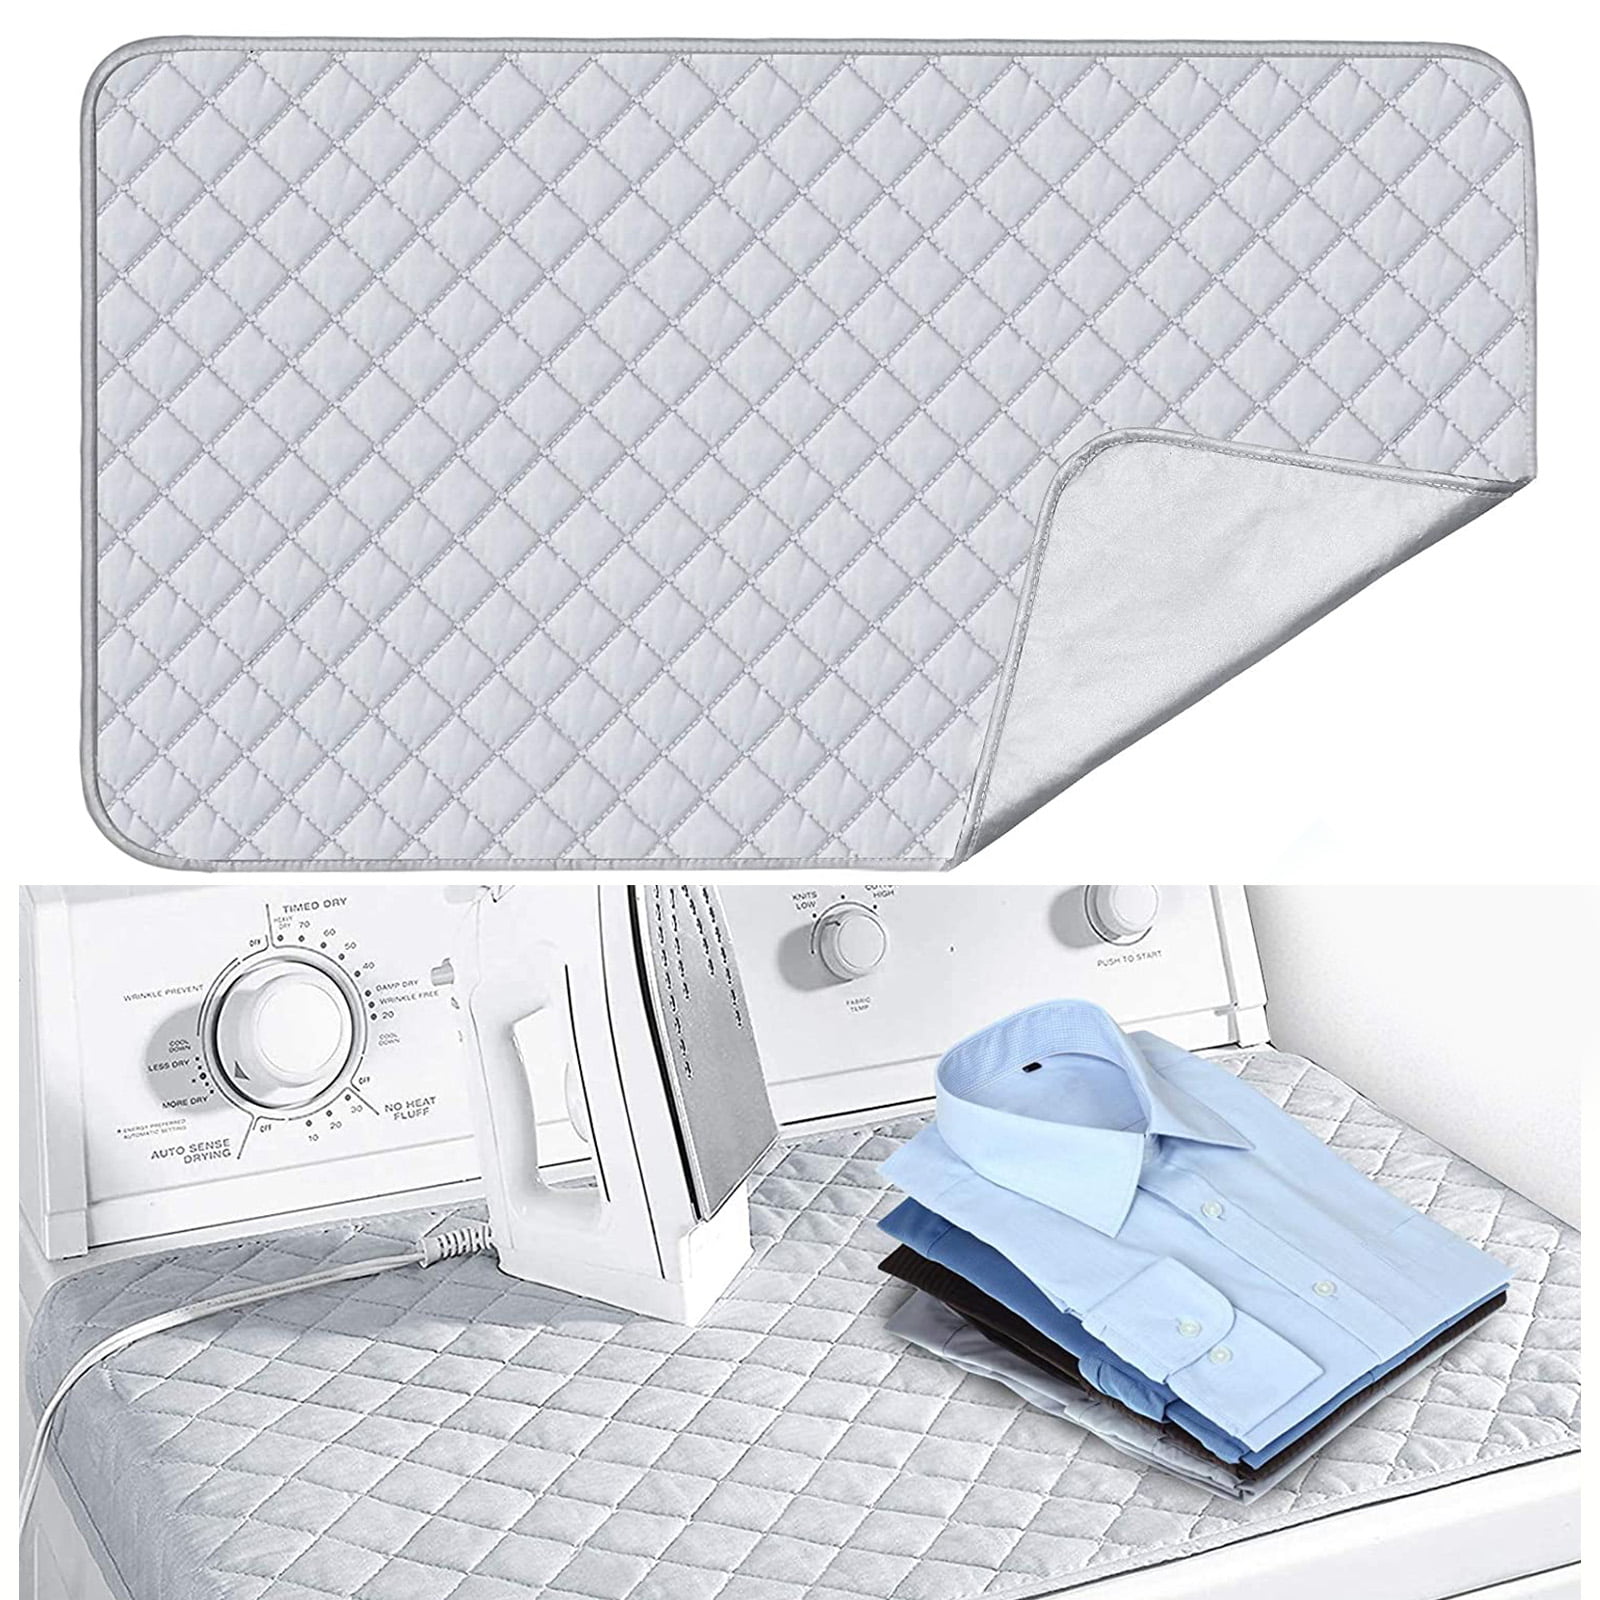 Ironing Blanket Ironing Mat,Upgraded Thick Portable Travel Ironing Pad,Isolate Heat Pad Cover for Washer,Dryer,Table Top,Countertop,Ironing Board for Small Space-19.6 x 28.3 inch